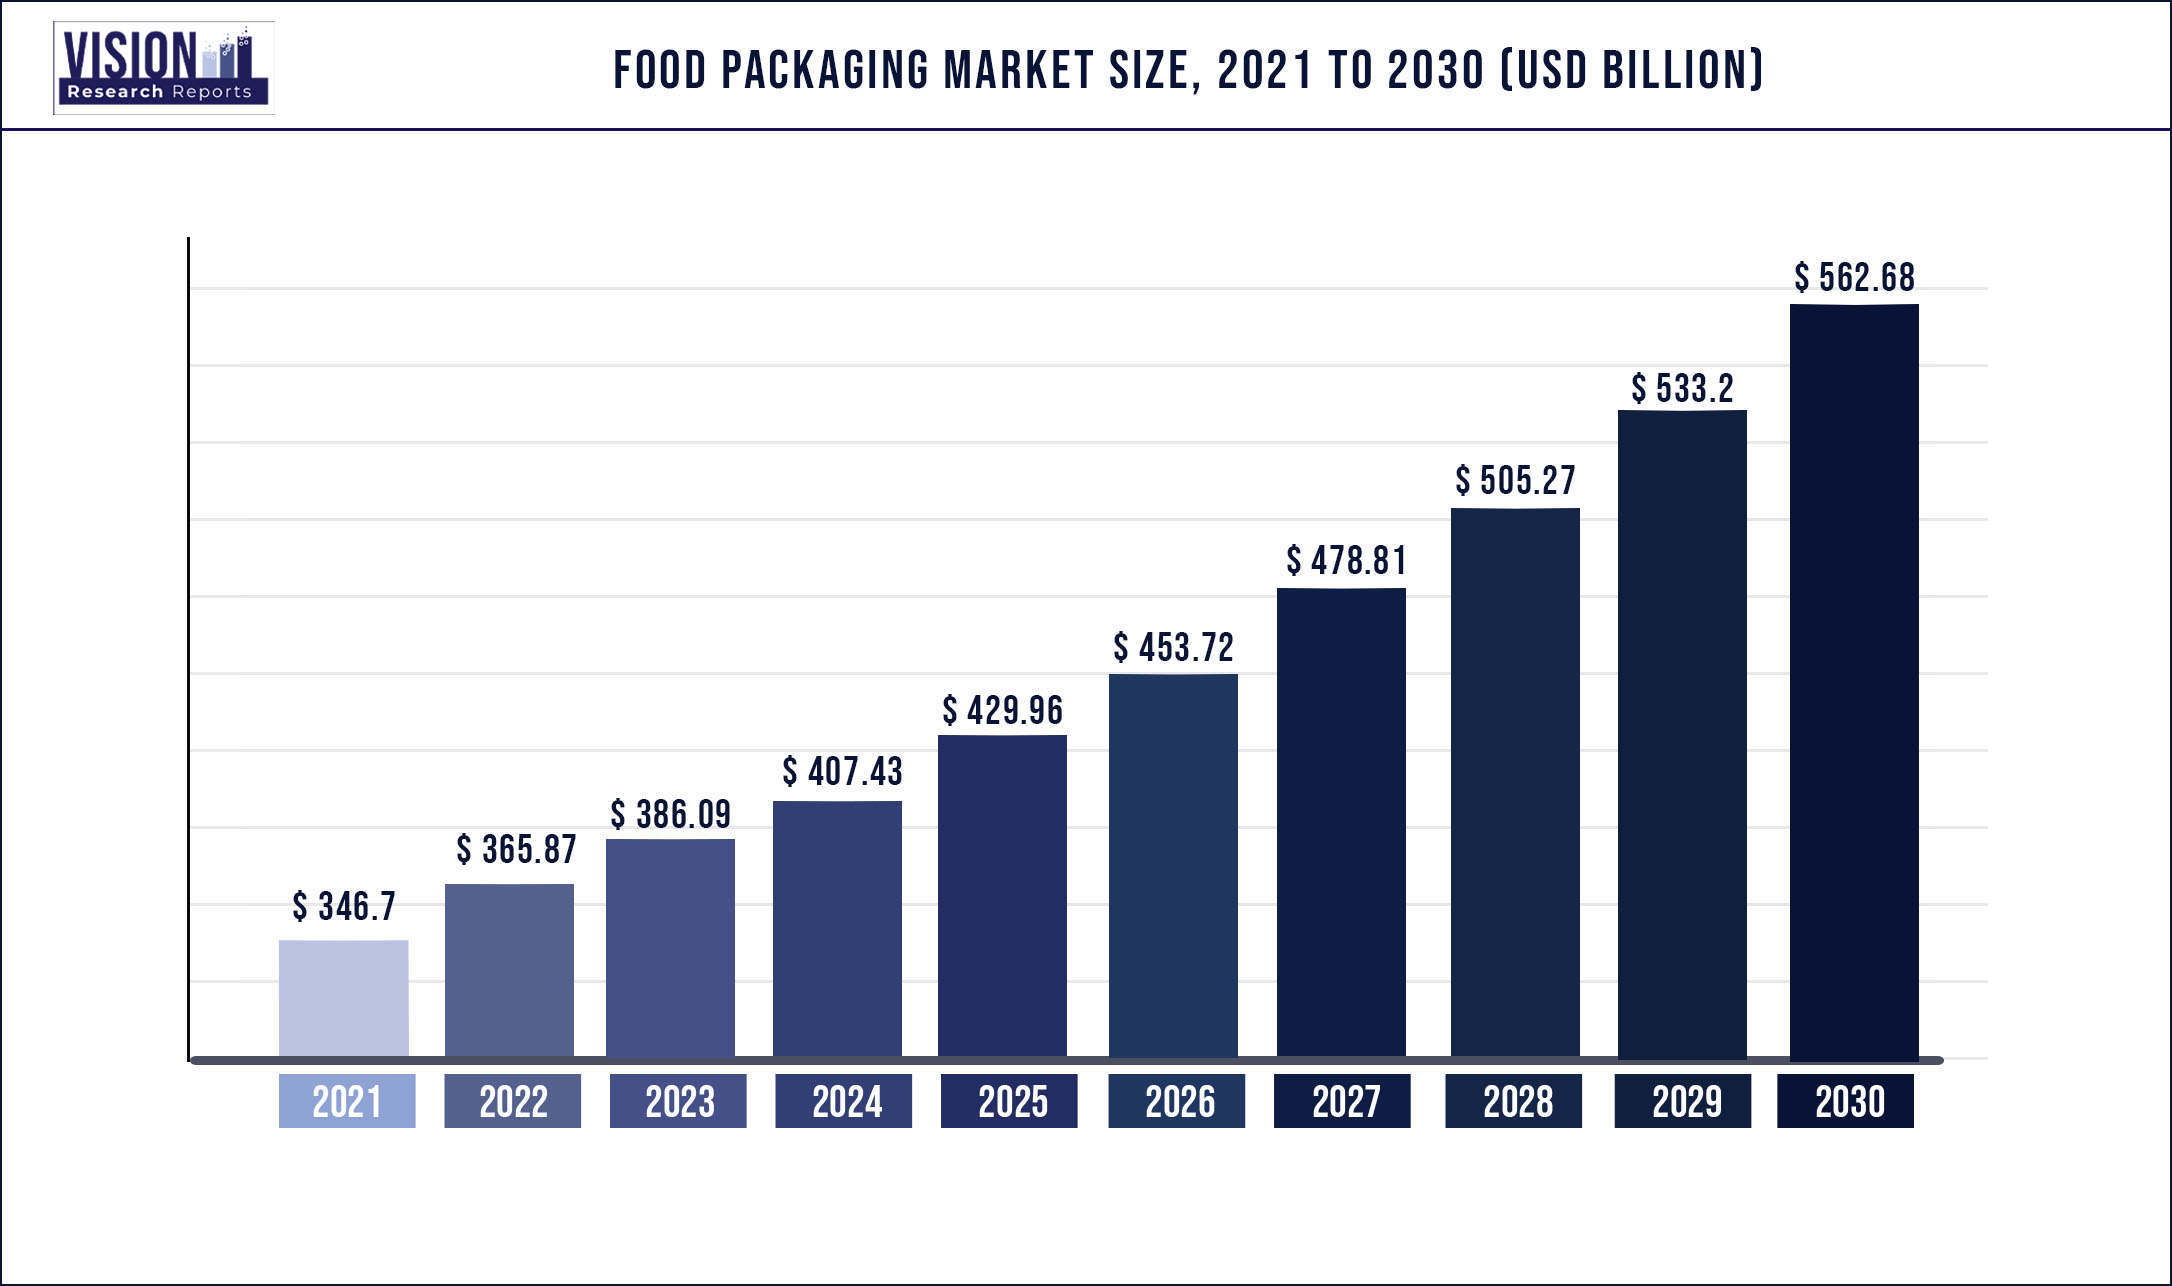 Food Packaging Market Size 2021 to 2030